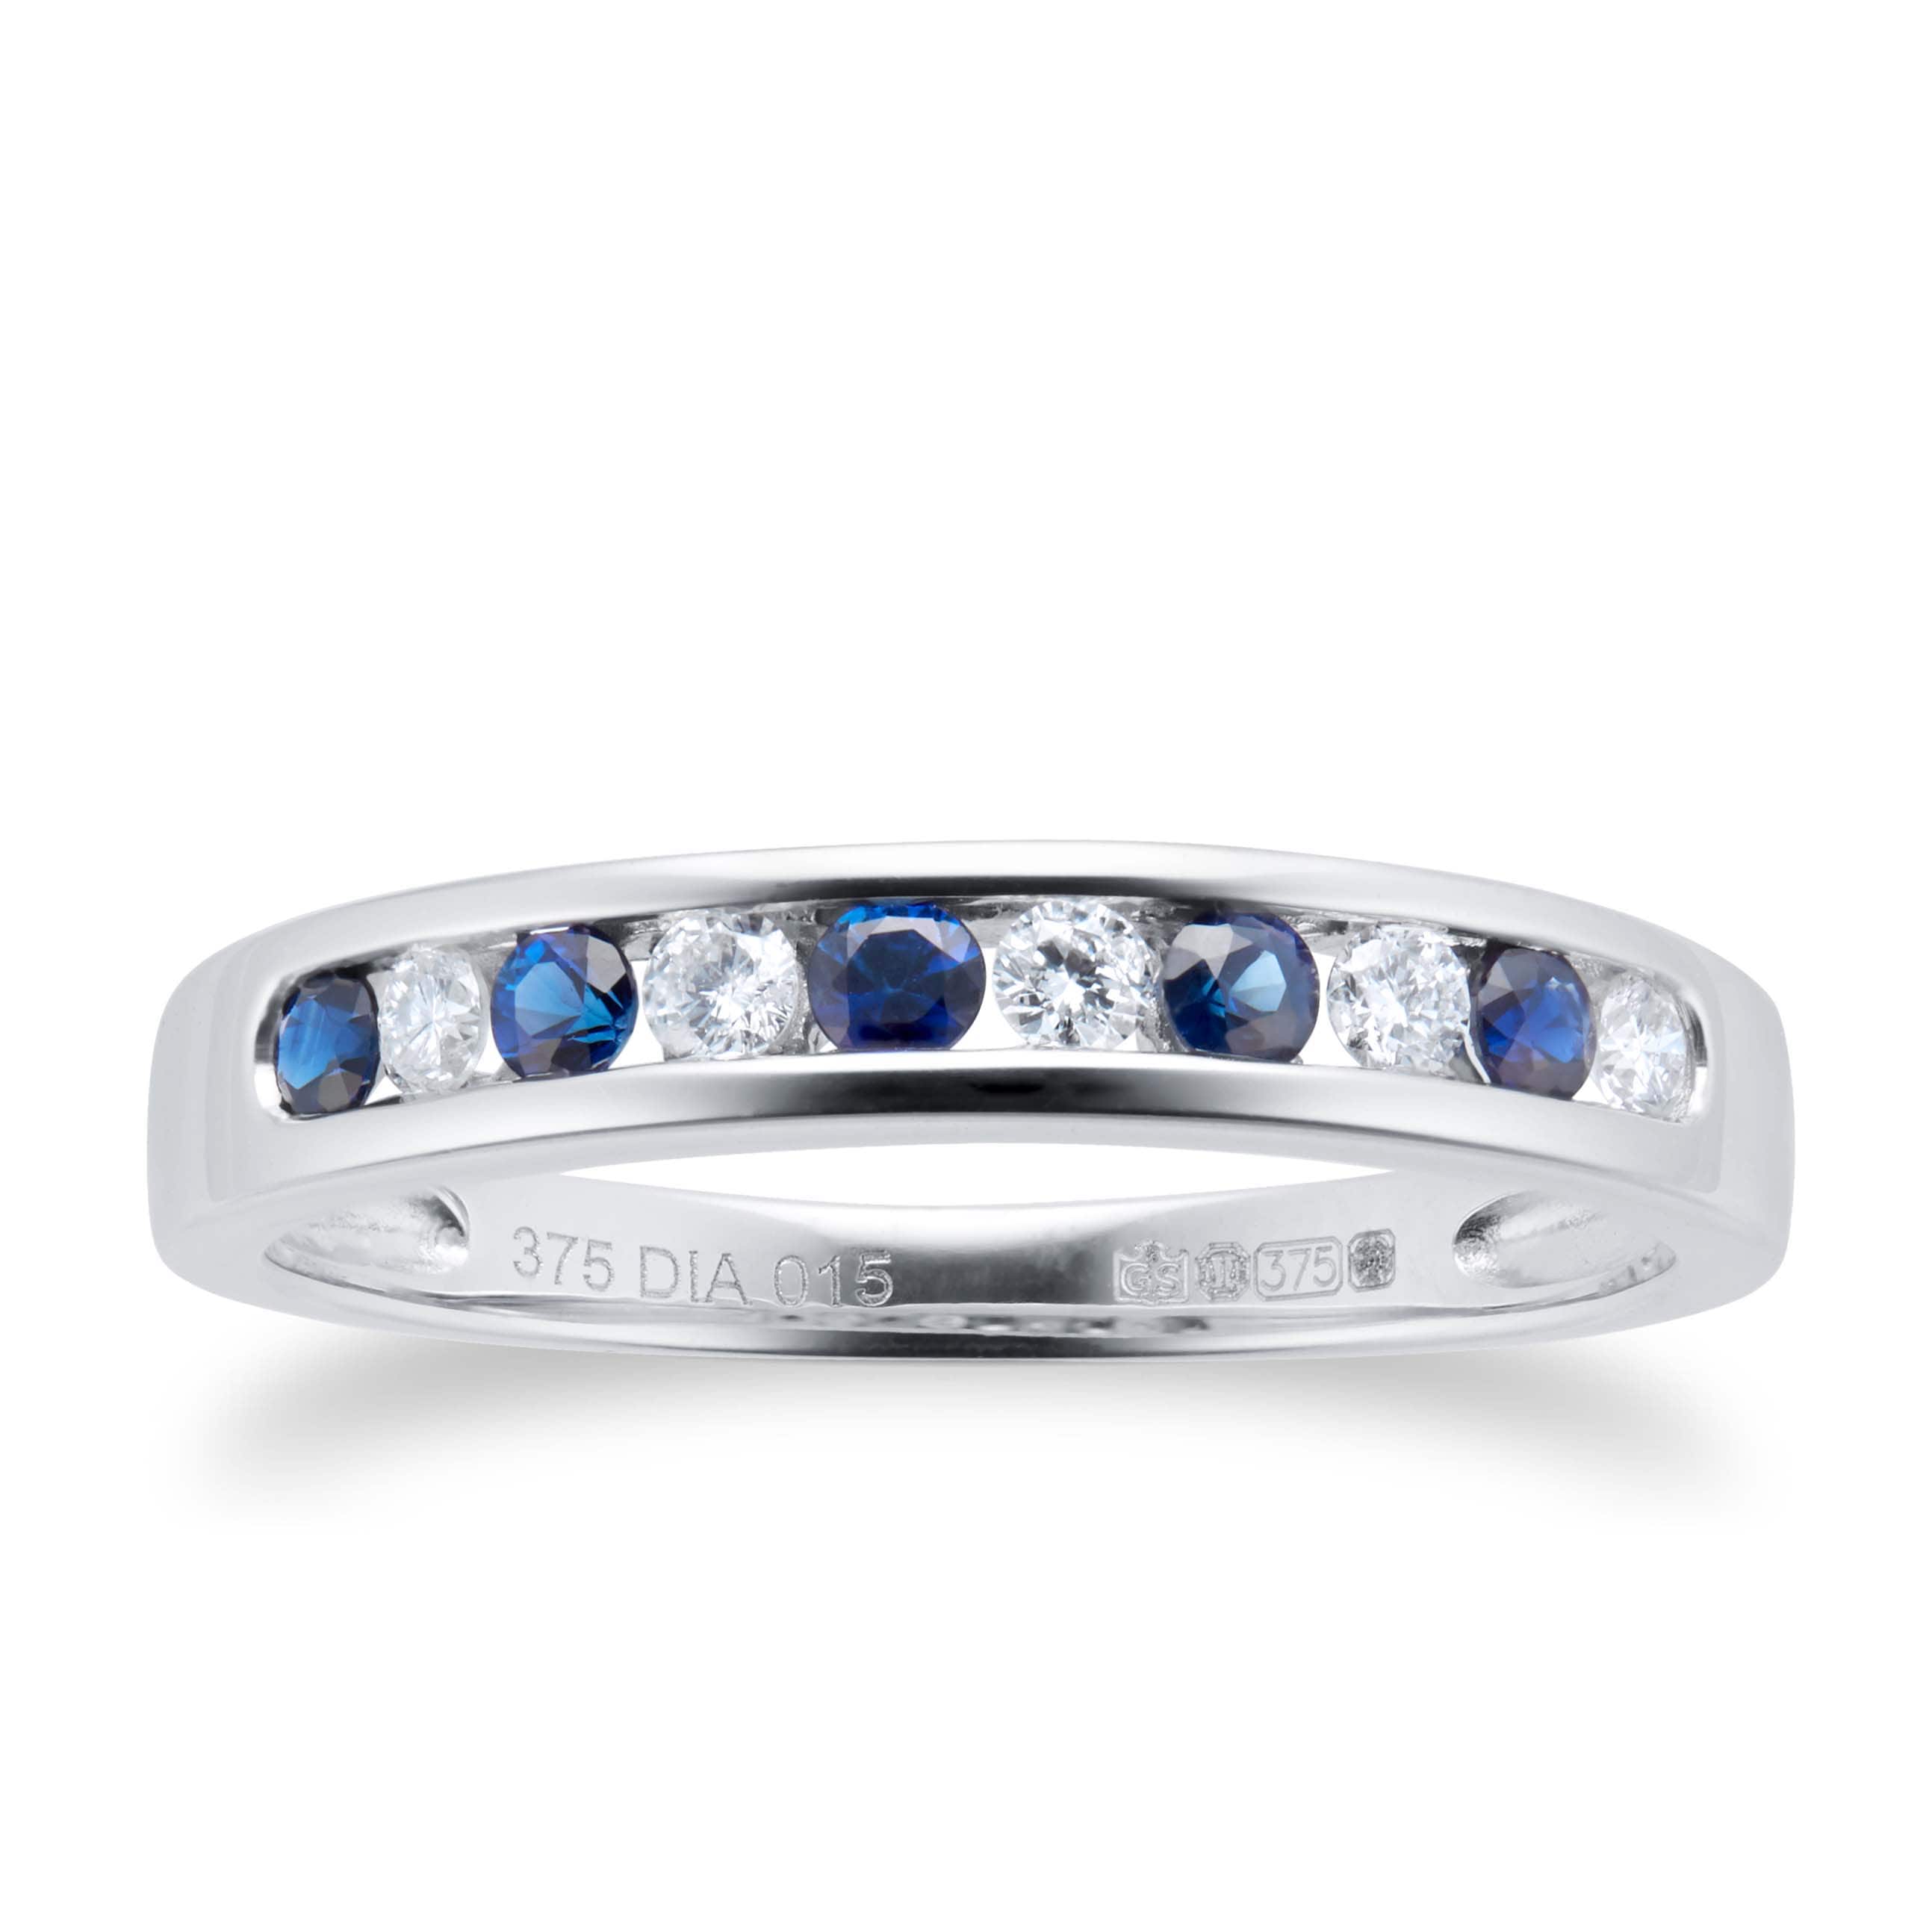 Brilliant Cut Sapphire And Diamond Eternity Ring In 9 Carat White Gold - Ring Size M